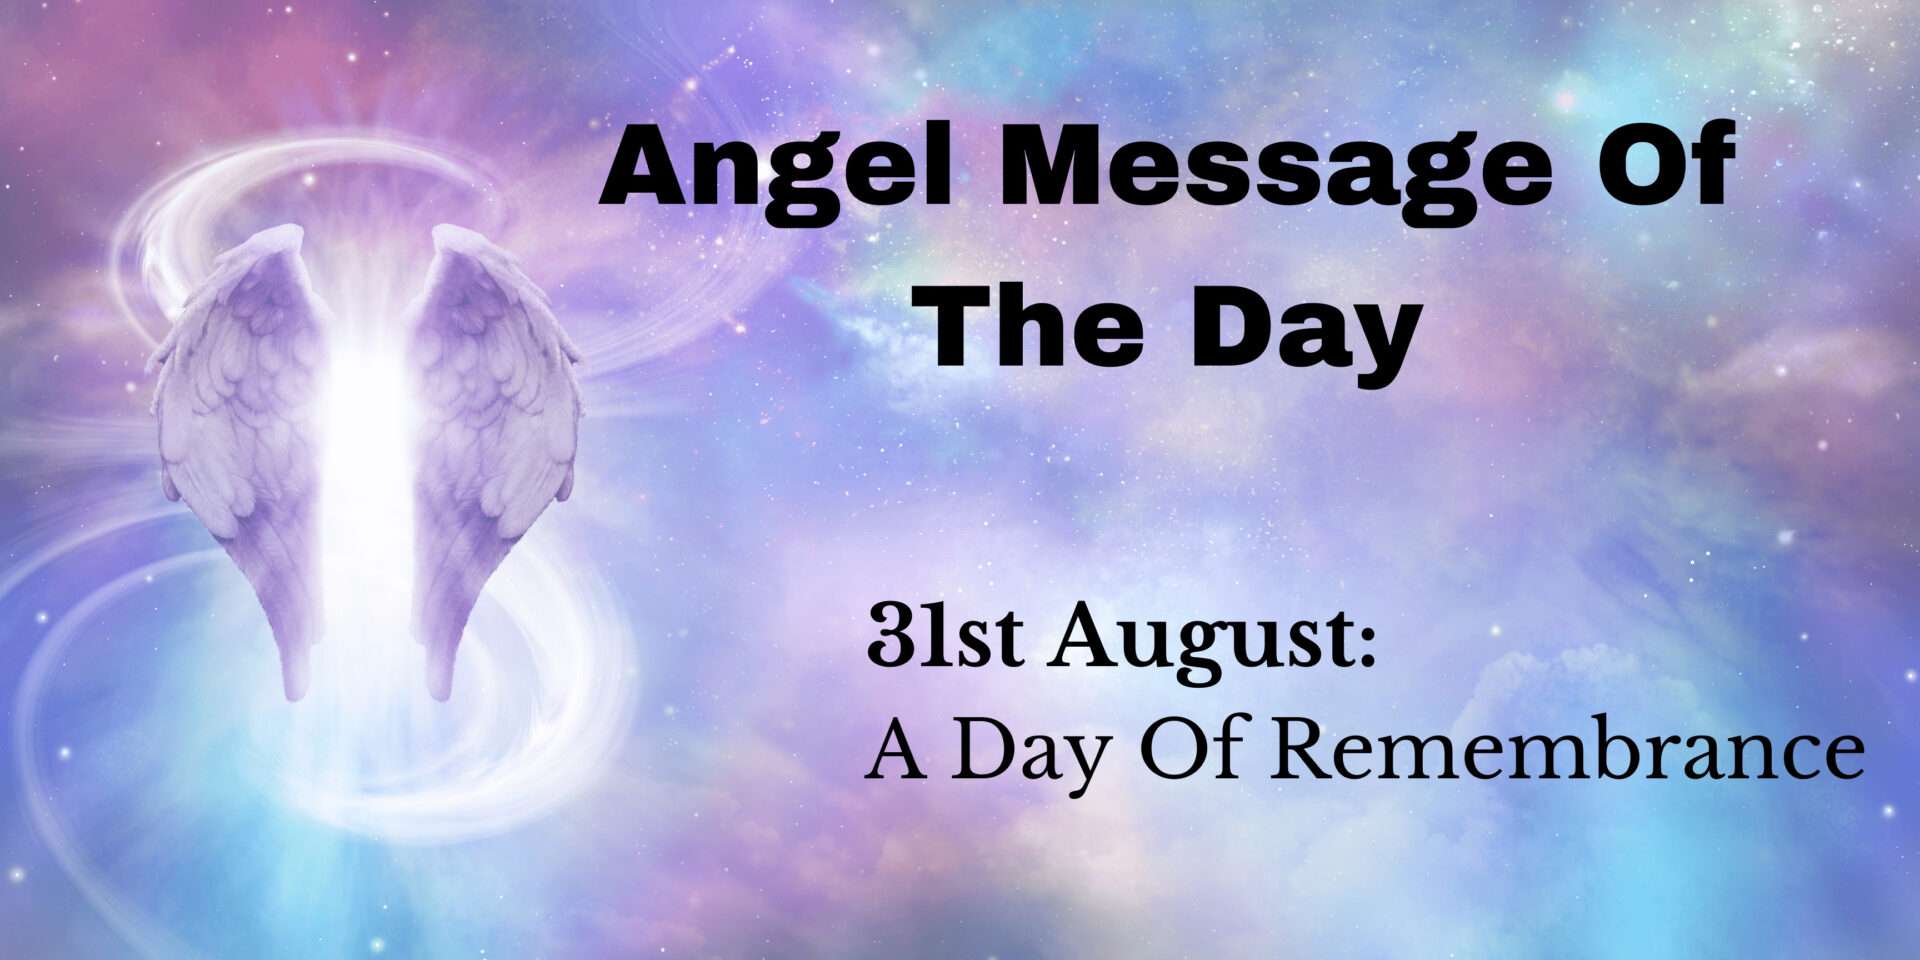 angel message of the day : a day of remembrance